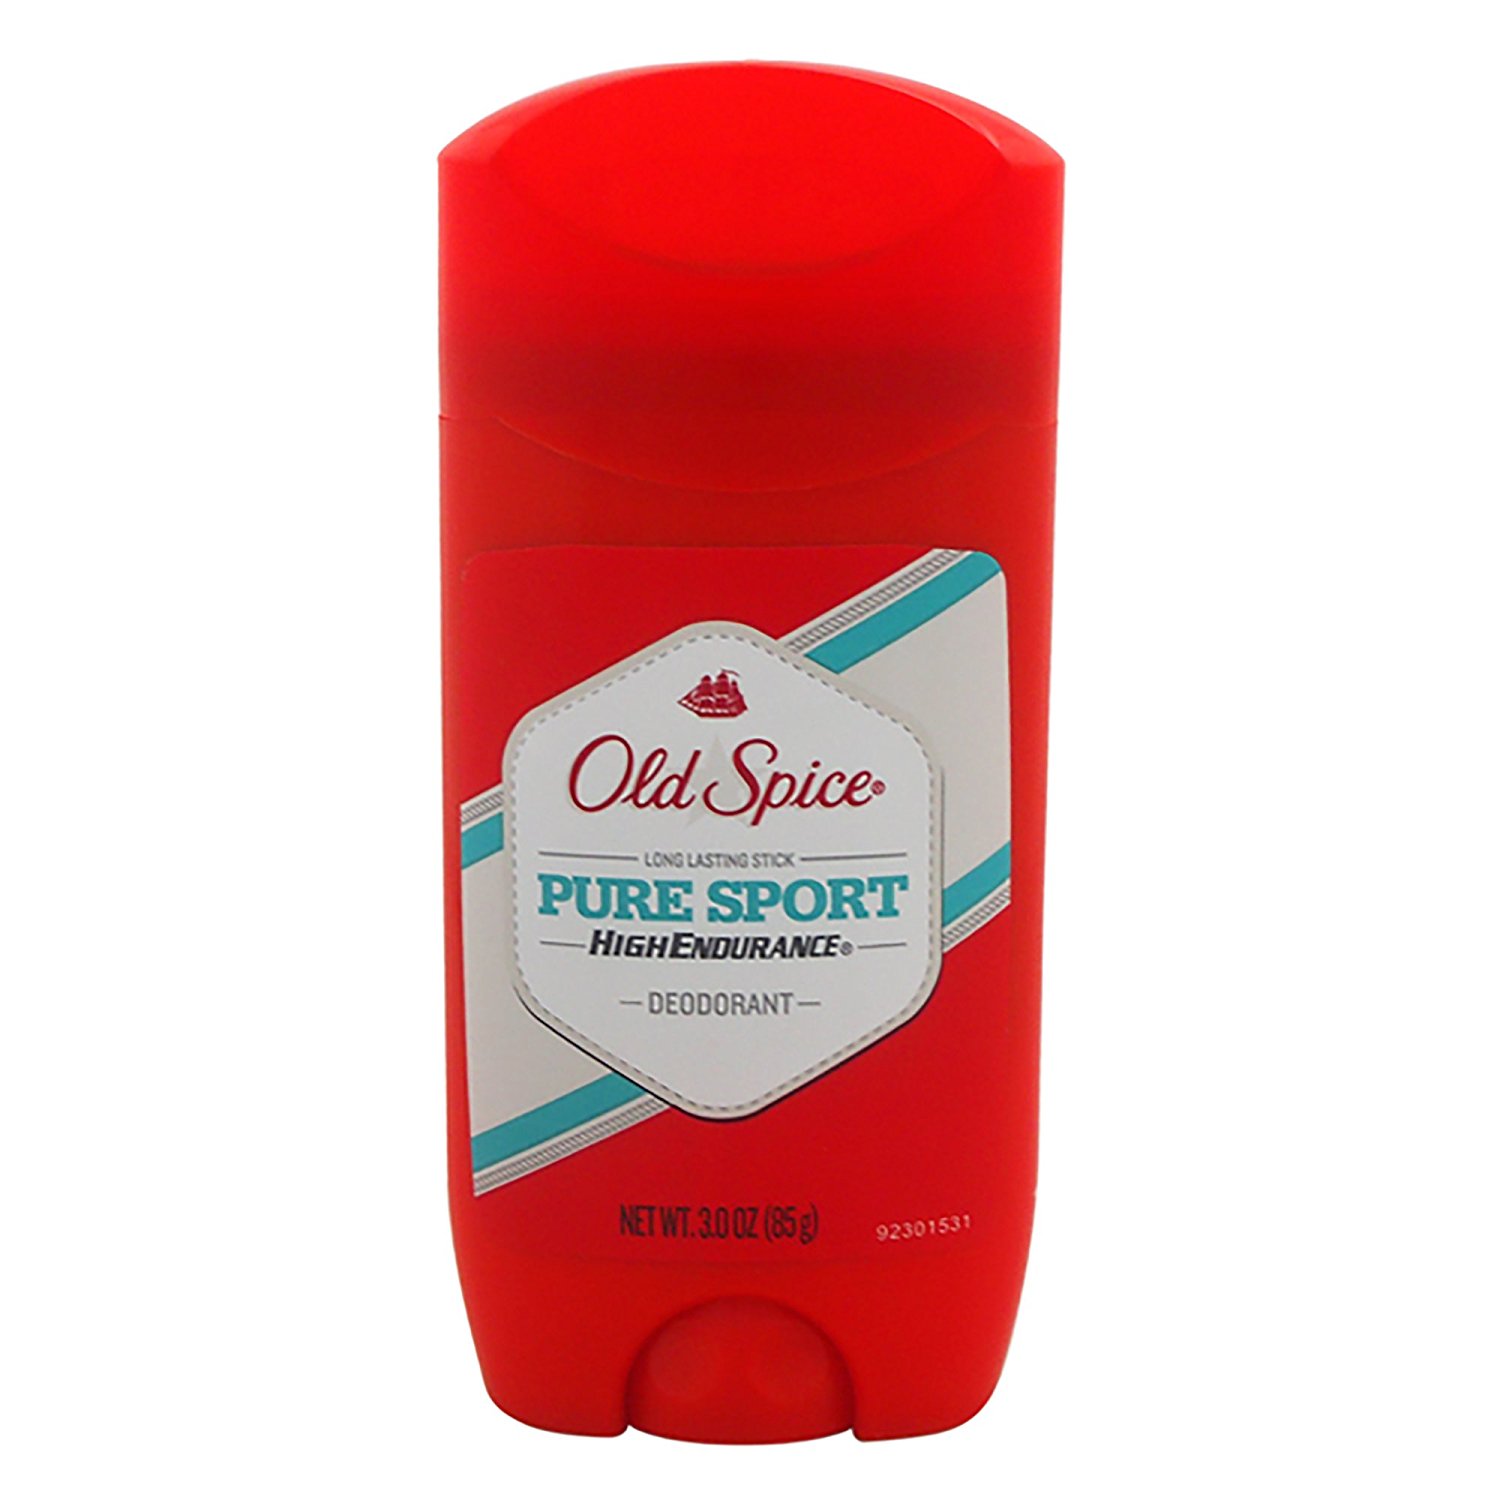 old spice pure sport deodorant